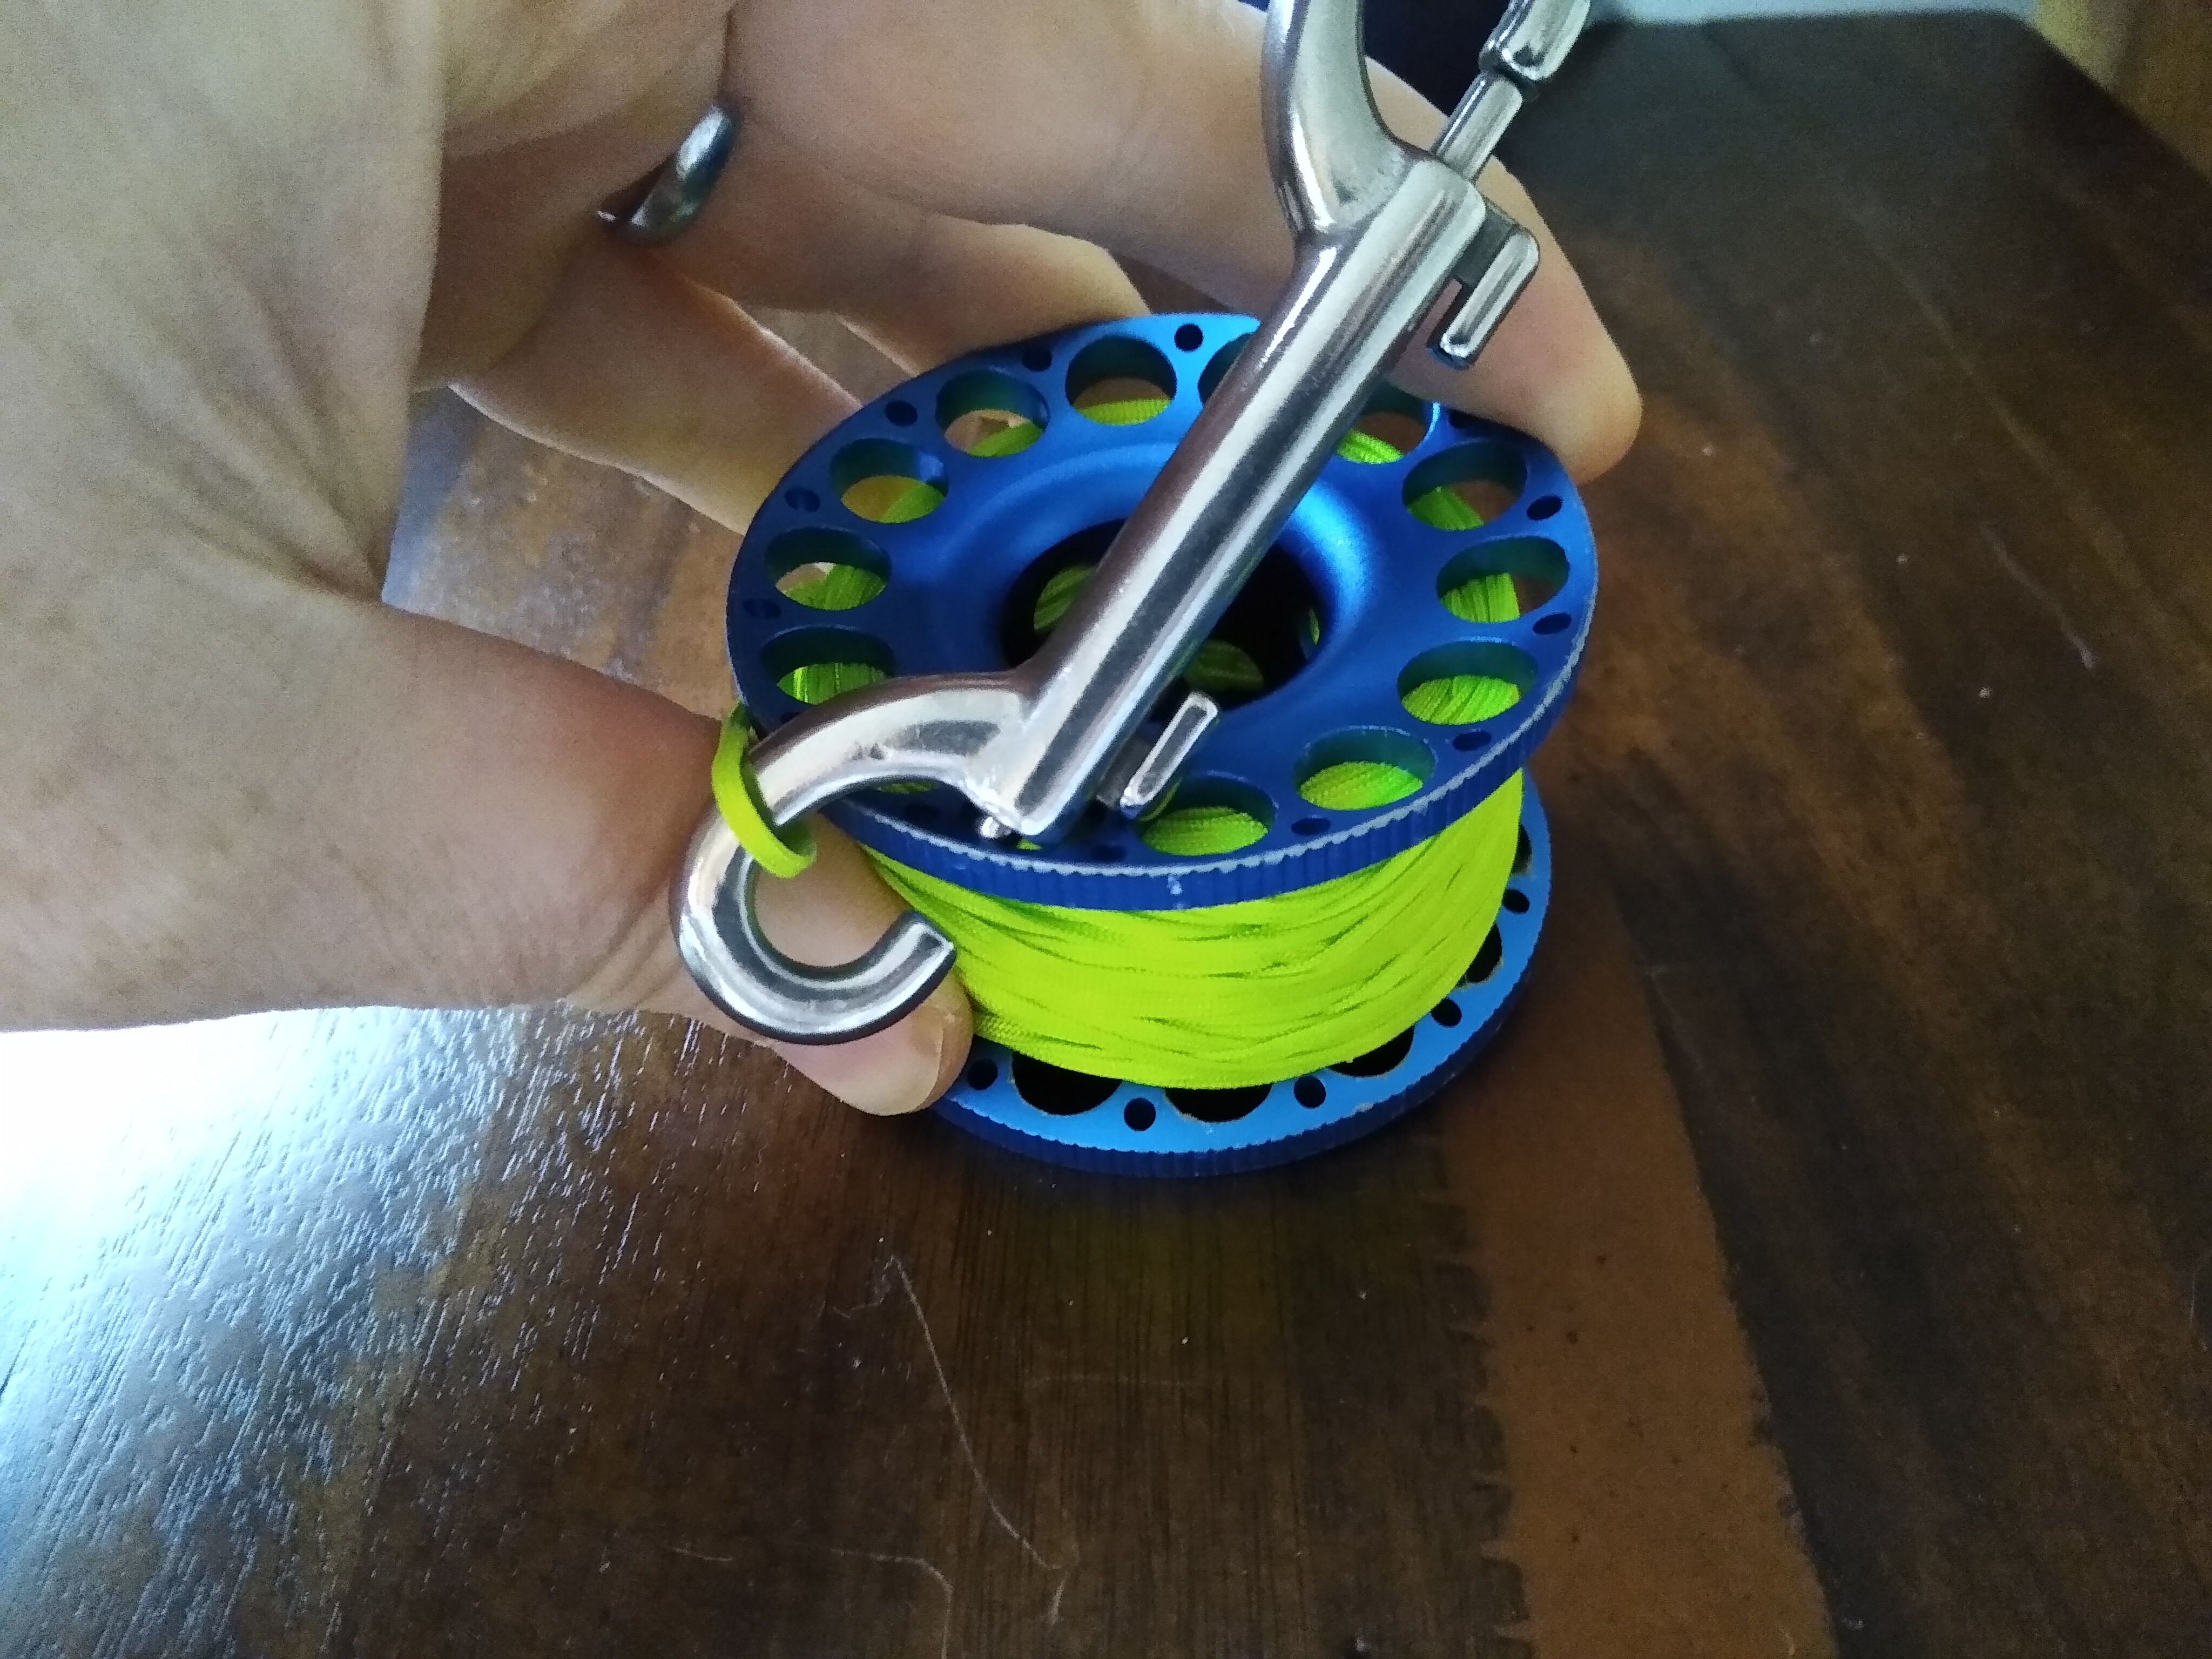 SMB spool issue, open bolt snap